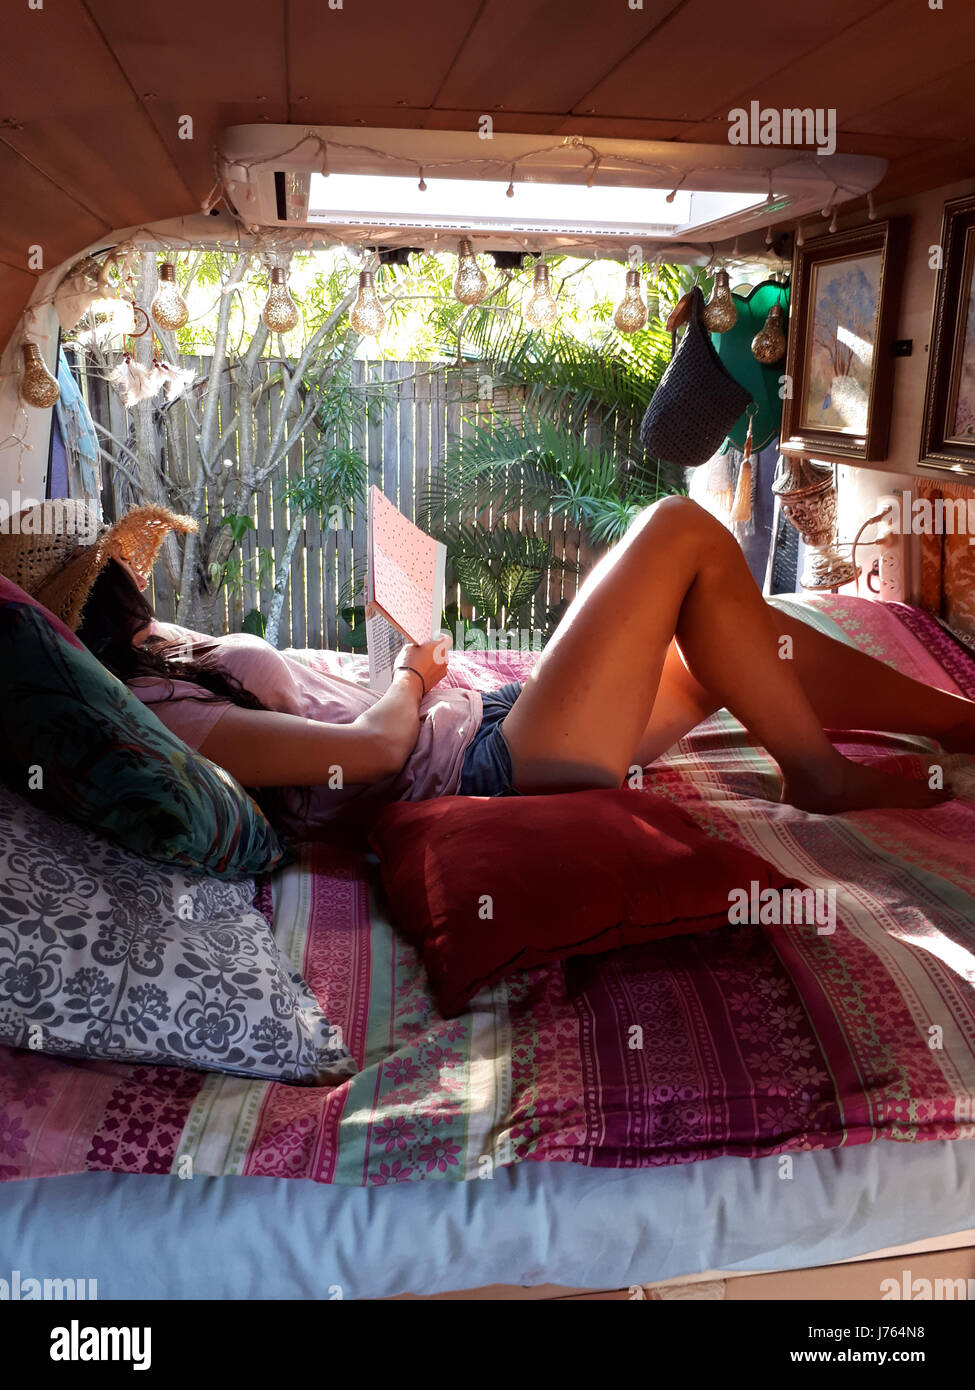 MEET the couple who sold both their businesses to travel the road and spent £8,500 transforming their Renault van into a glamper van called Lucy. The series of envy-inducing pictures and video show how Juliet (35) and Frank (39) from Melbourne, Australia spent three-months working on their rolling home which they are now living in as they travel around the country with their beloved pet dogs, Arnie and Wolly. Other images show the couple relaxing inside the stunning van, preparing dinner in their self-contained kitchen area and embracing the great outdoors by cooking a steak on an open fire. B Stock Photo